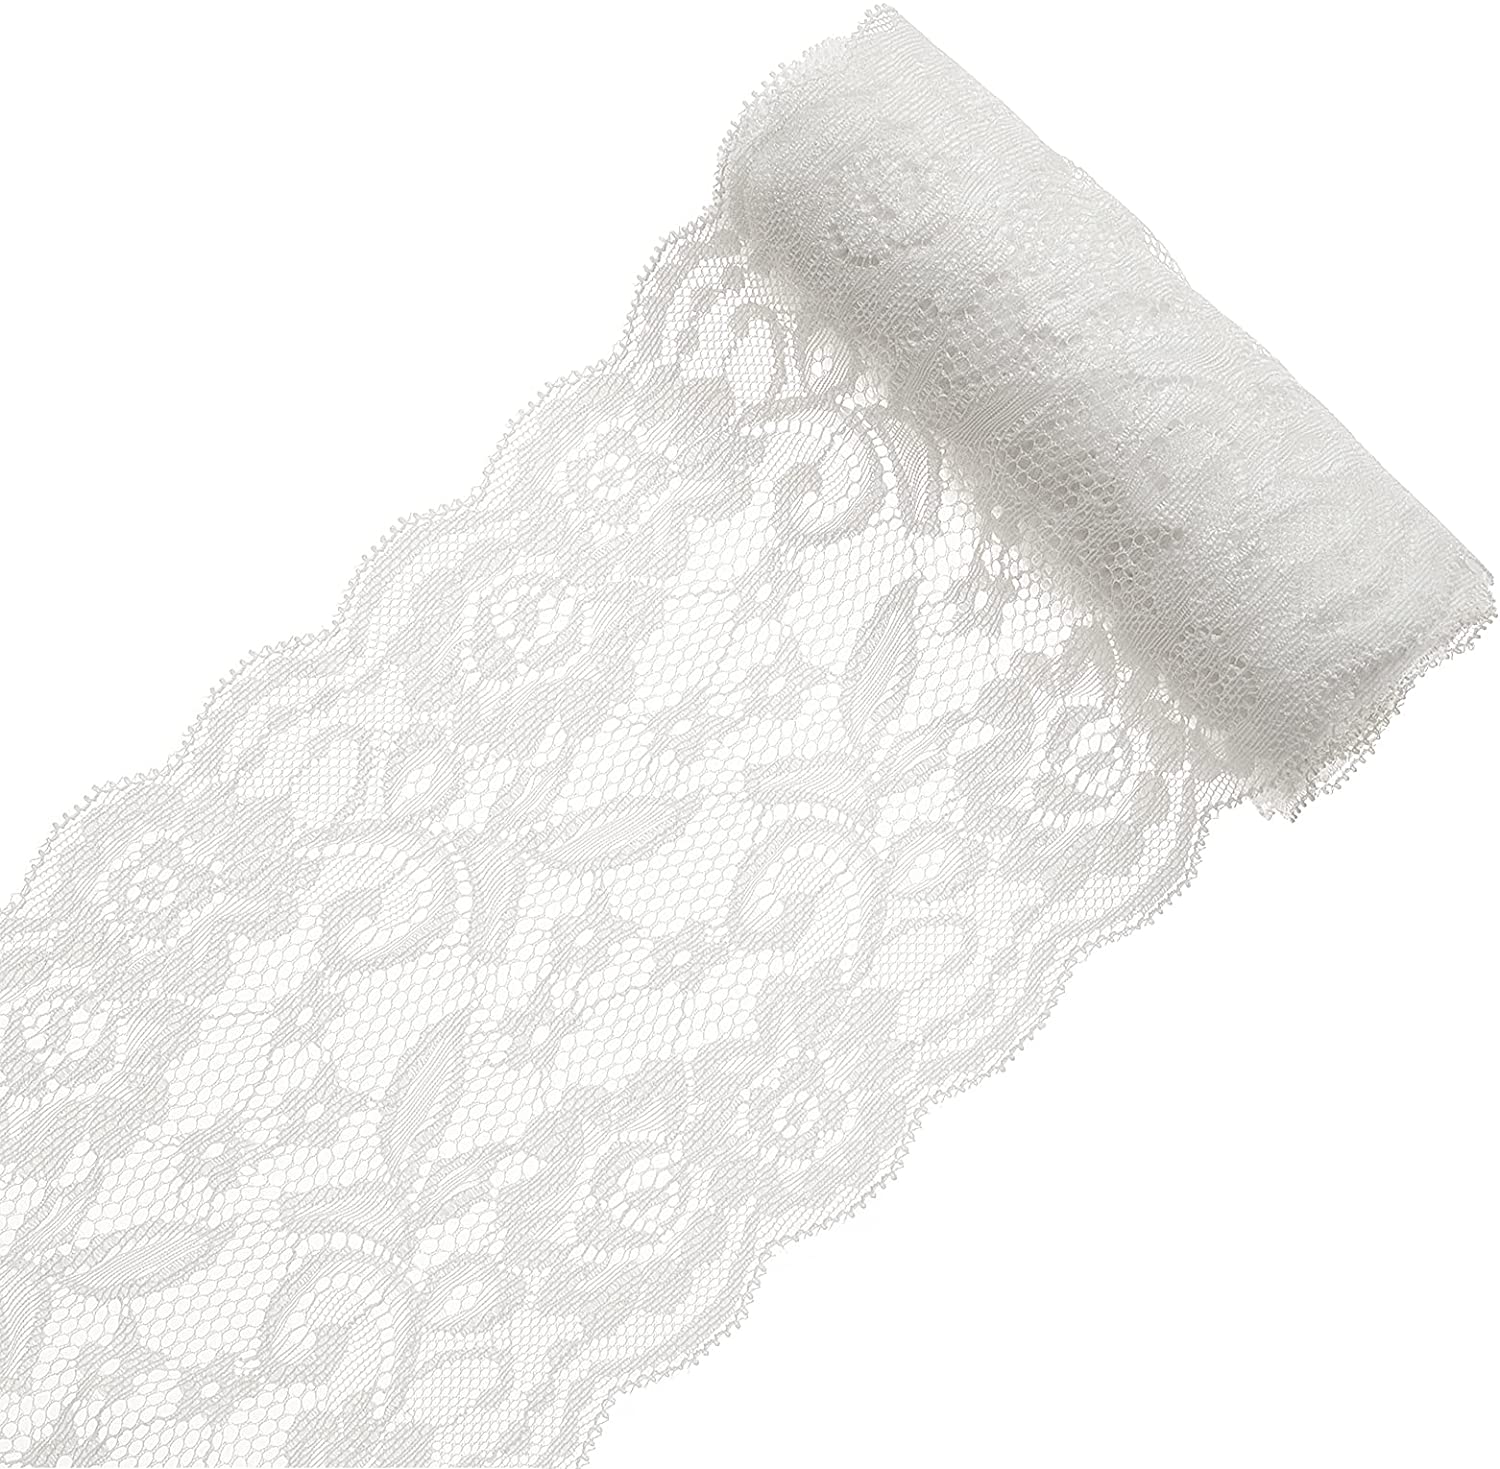 Off White Eyelet Cotton Lace Fabric Scalloped Edge Cotton Fabric By the Yard